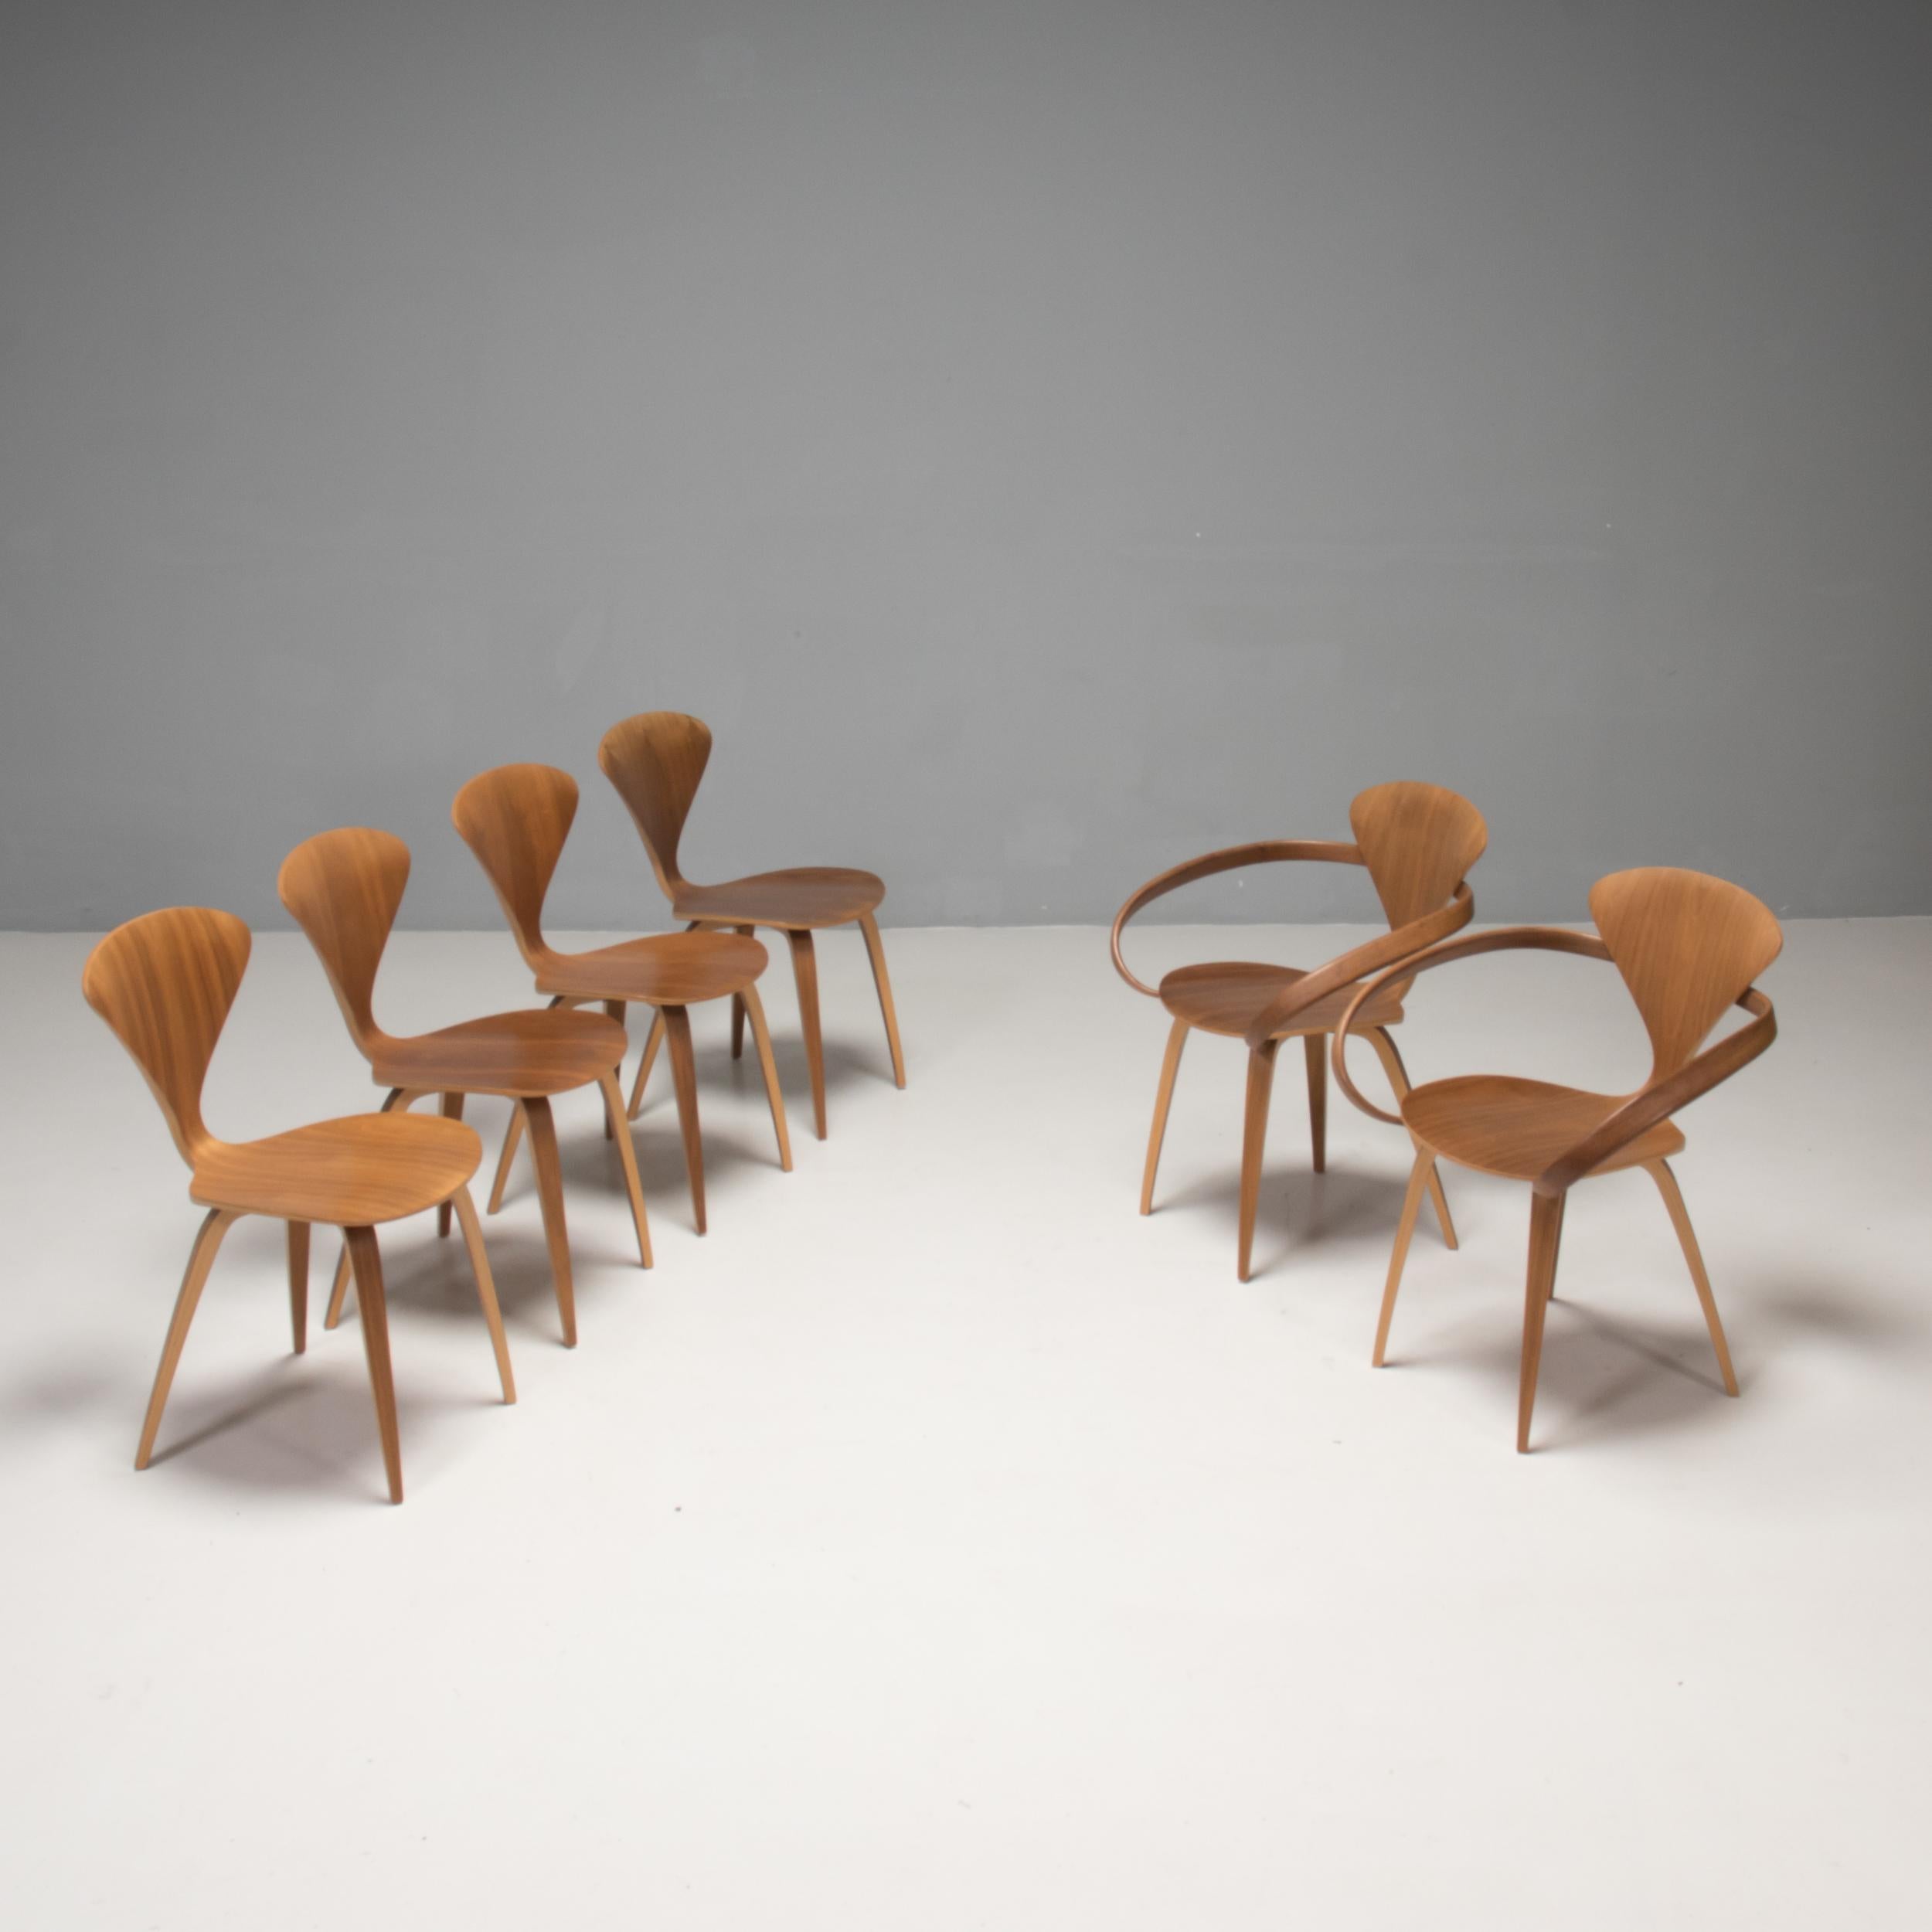 Originally designed by Norman Cherner in 1958, the Cherner carver and side chairs have since become some of the most iconic designs of the 20th century.

In 1999 Norman Cherner’s sons founded the Cherner Chair Company, re-issuing their father's